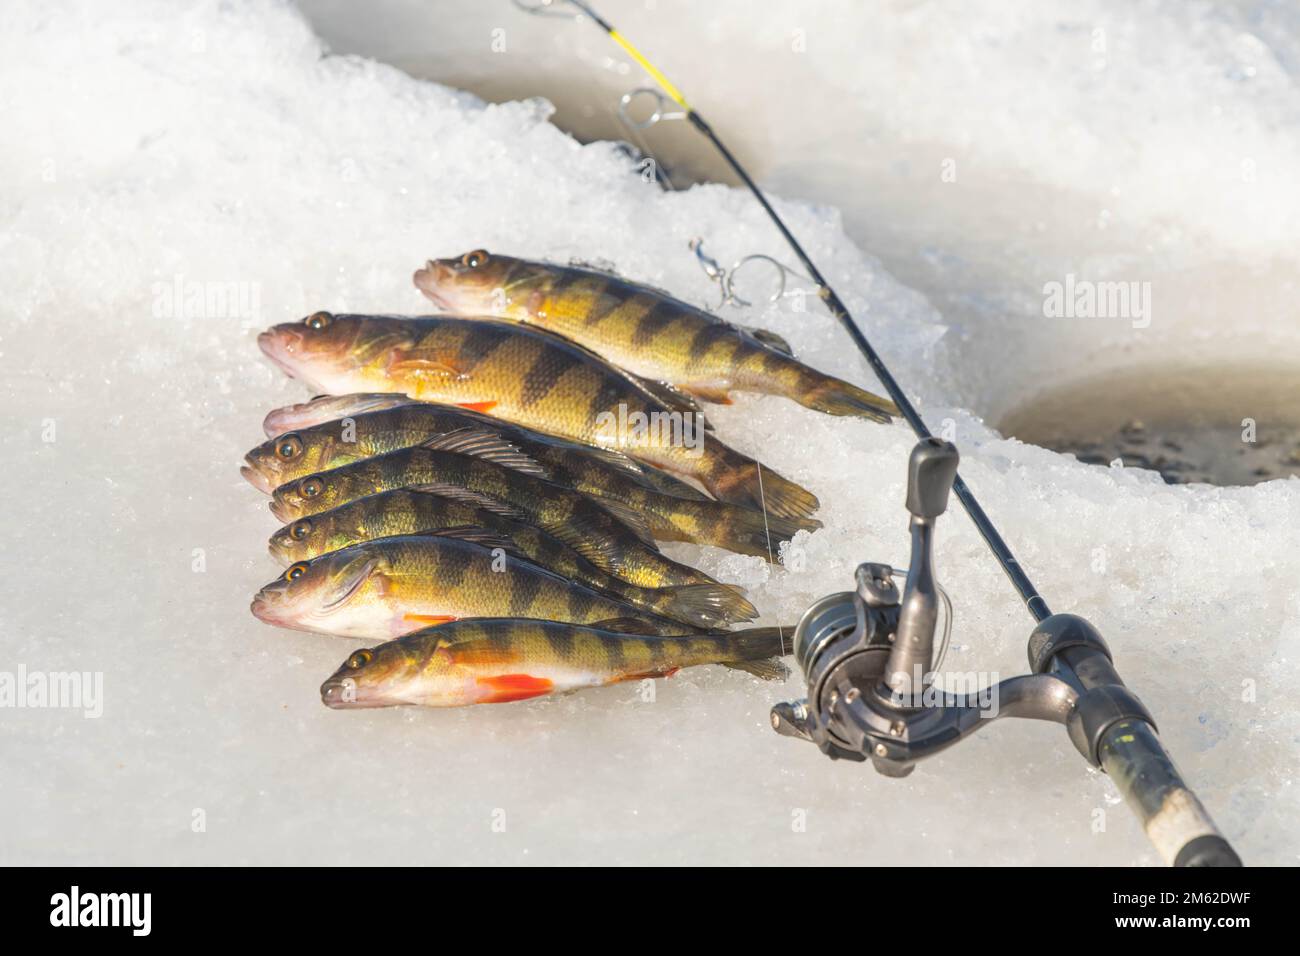 Yellow perch ice fishing day nice catch, freshwater lake, outdoor